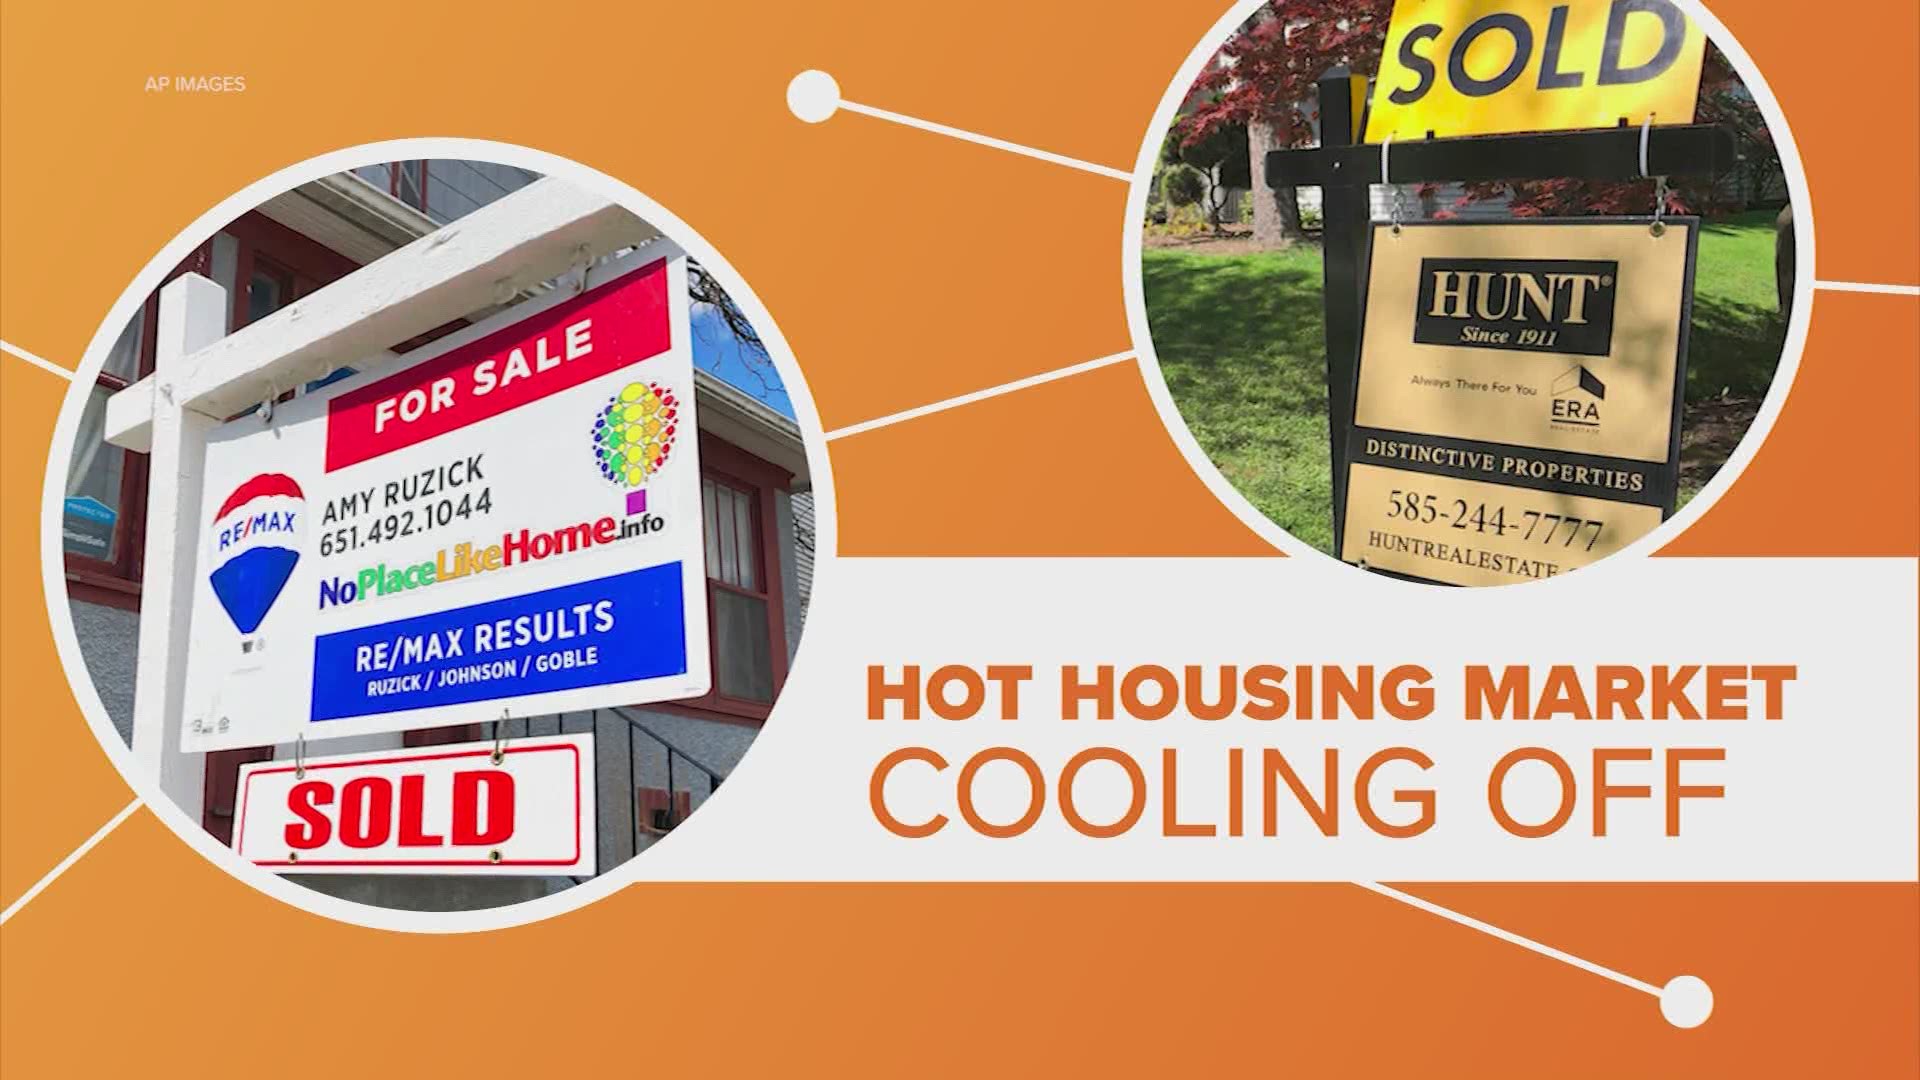 KHOU 11's Tiffany Craig reports on the reasons why the housing market may finally be starting to "cool off"